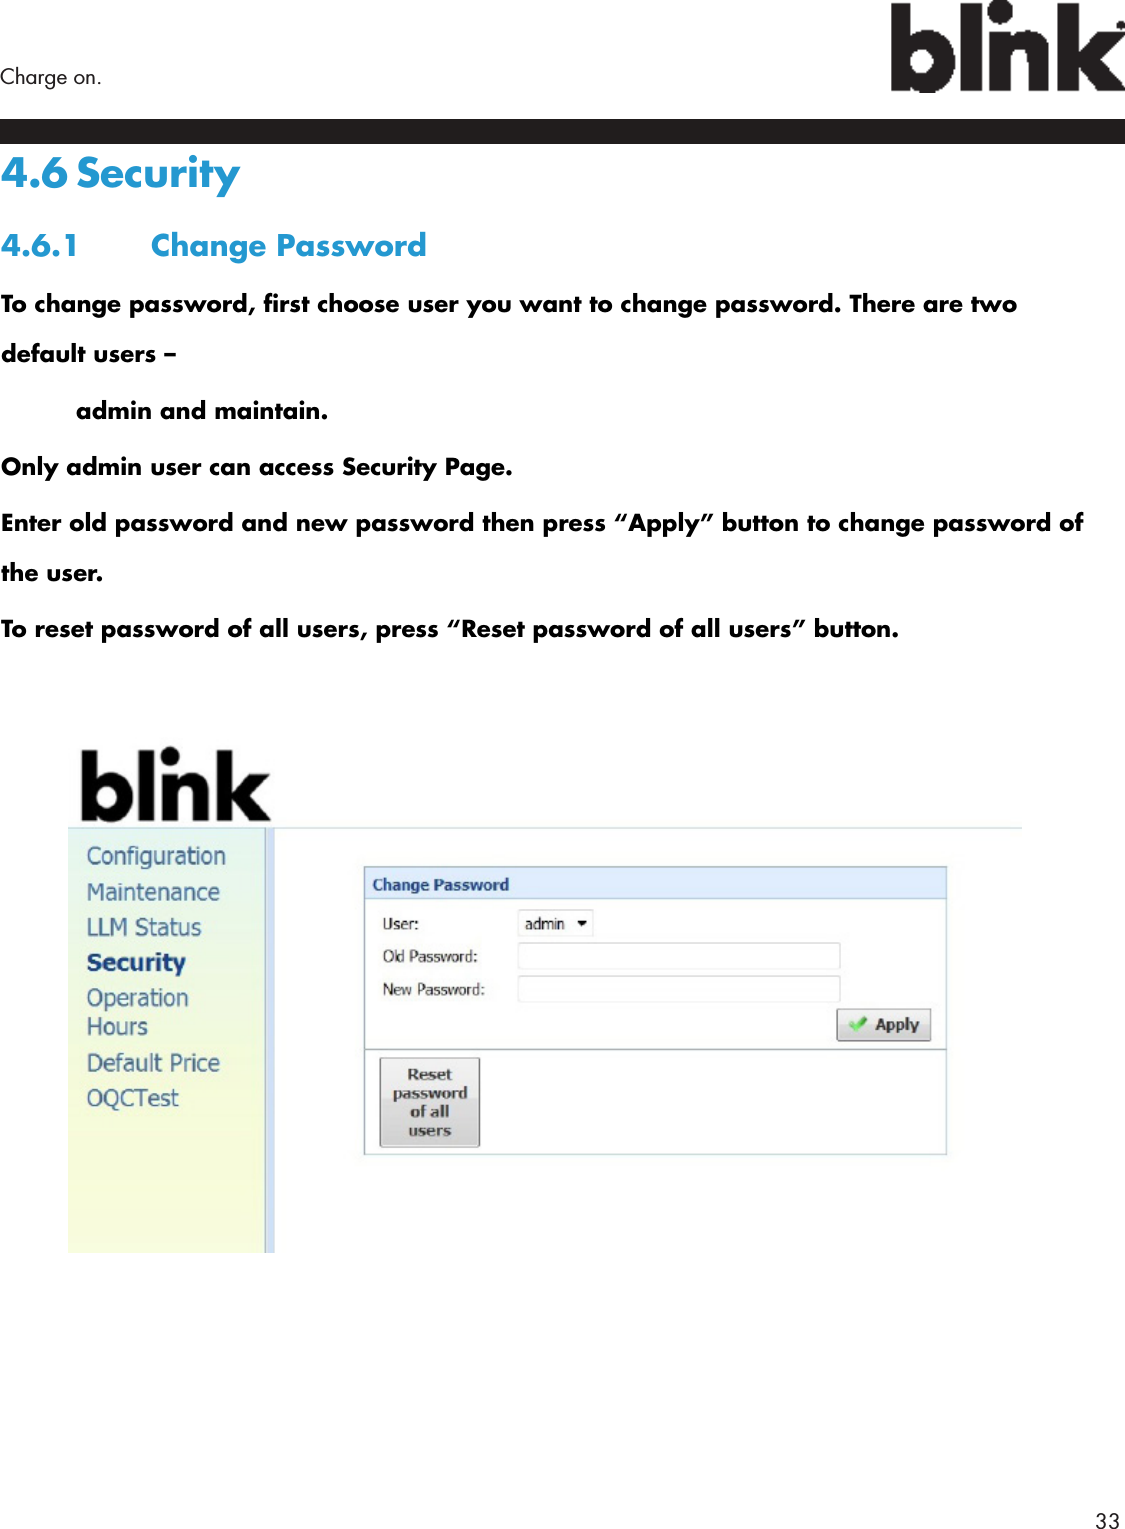        33Charge on.4.6 Security4.6.1  Change PasswordTo change password, rst choose user you want to change password. There are two default users –  admin and maintain. Only admin user can access Security Page. Enter old password and new password then press “Apply” button to change password of the user.To reset password of all users, press “Reset password of all users” button.